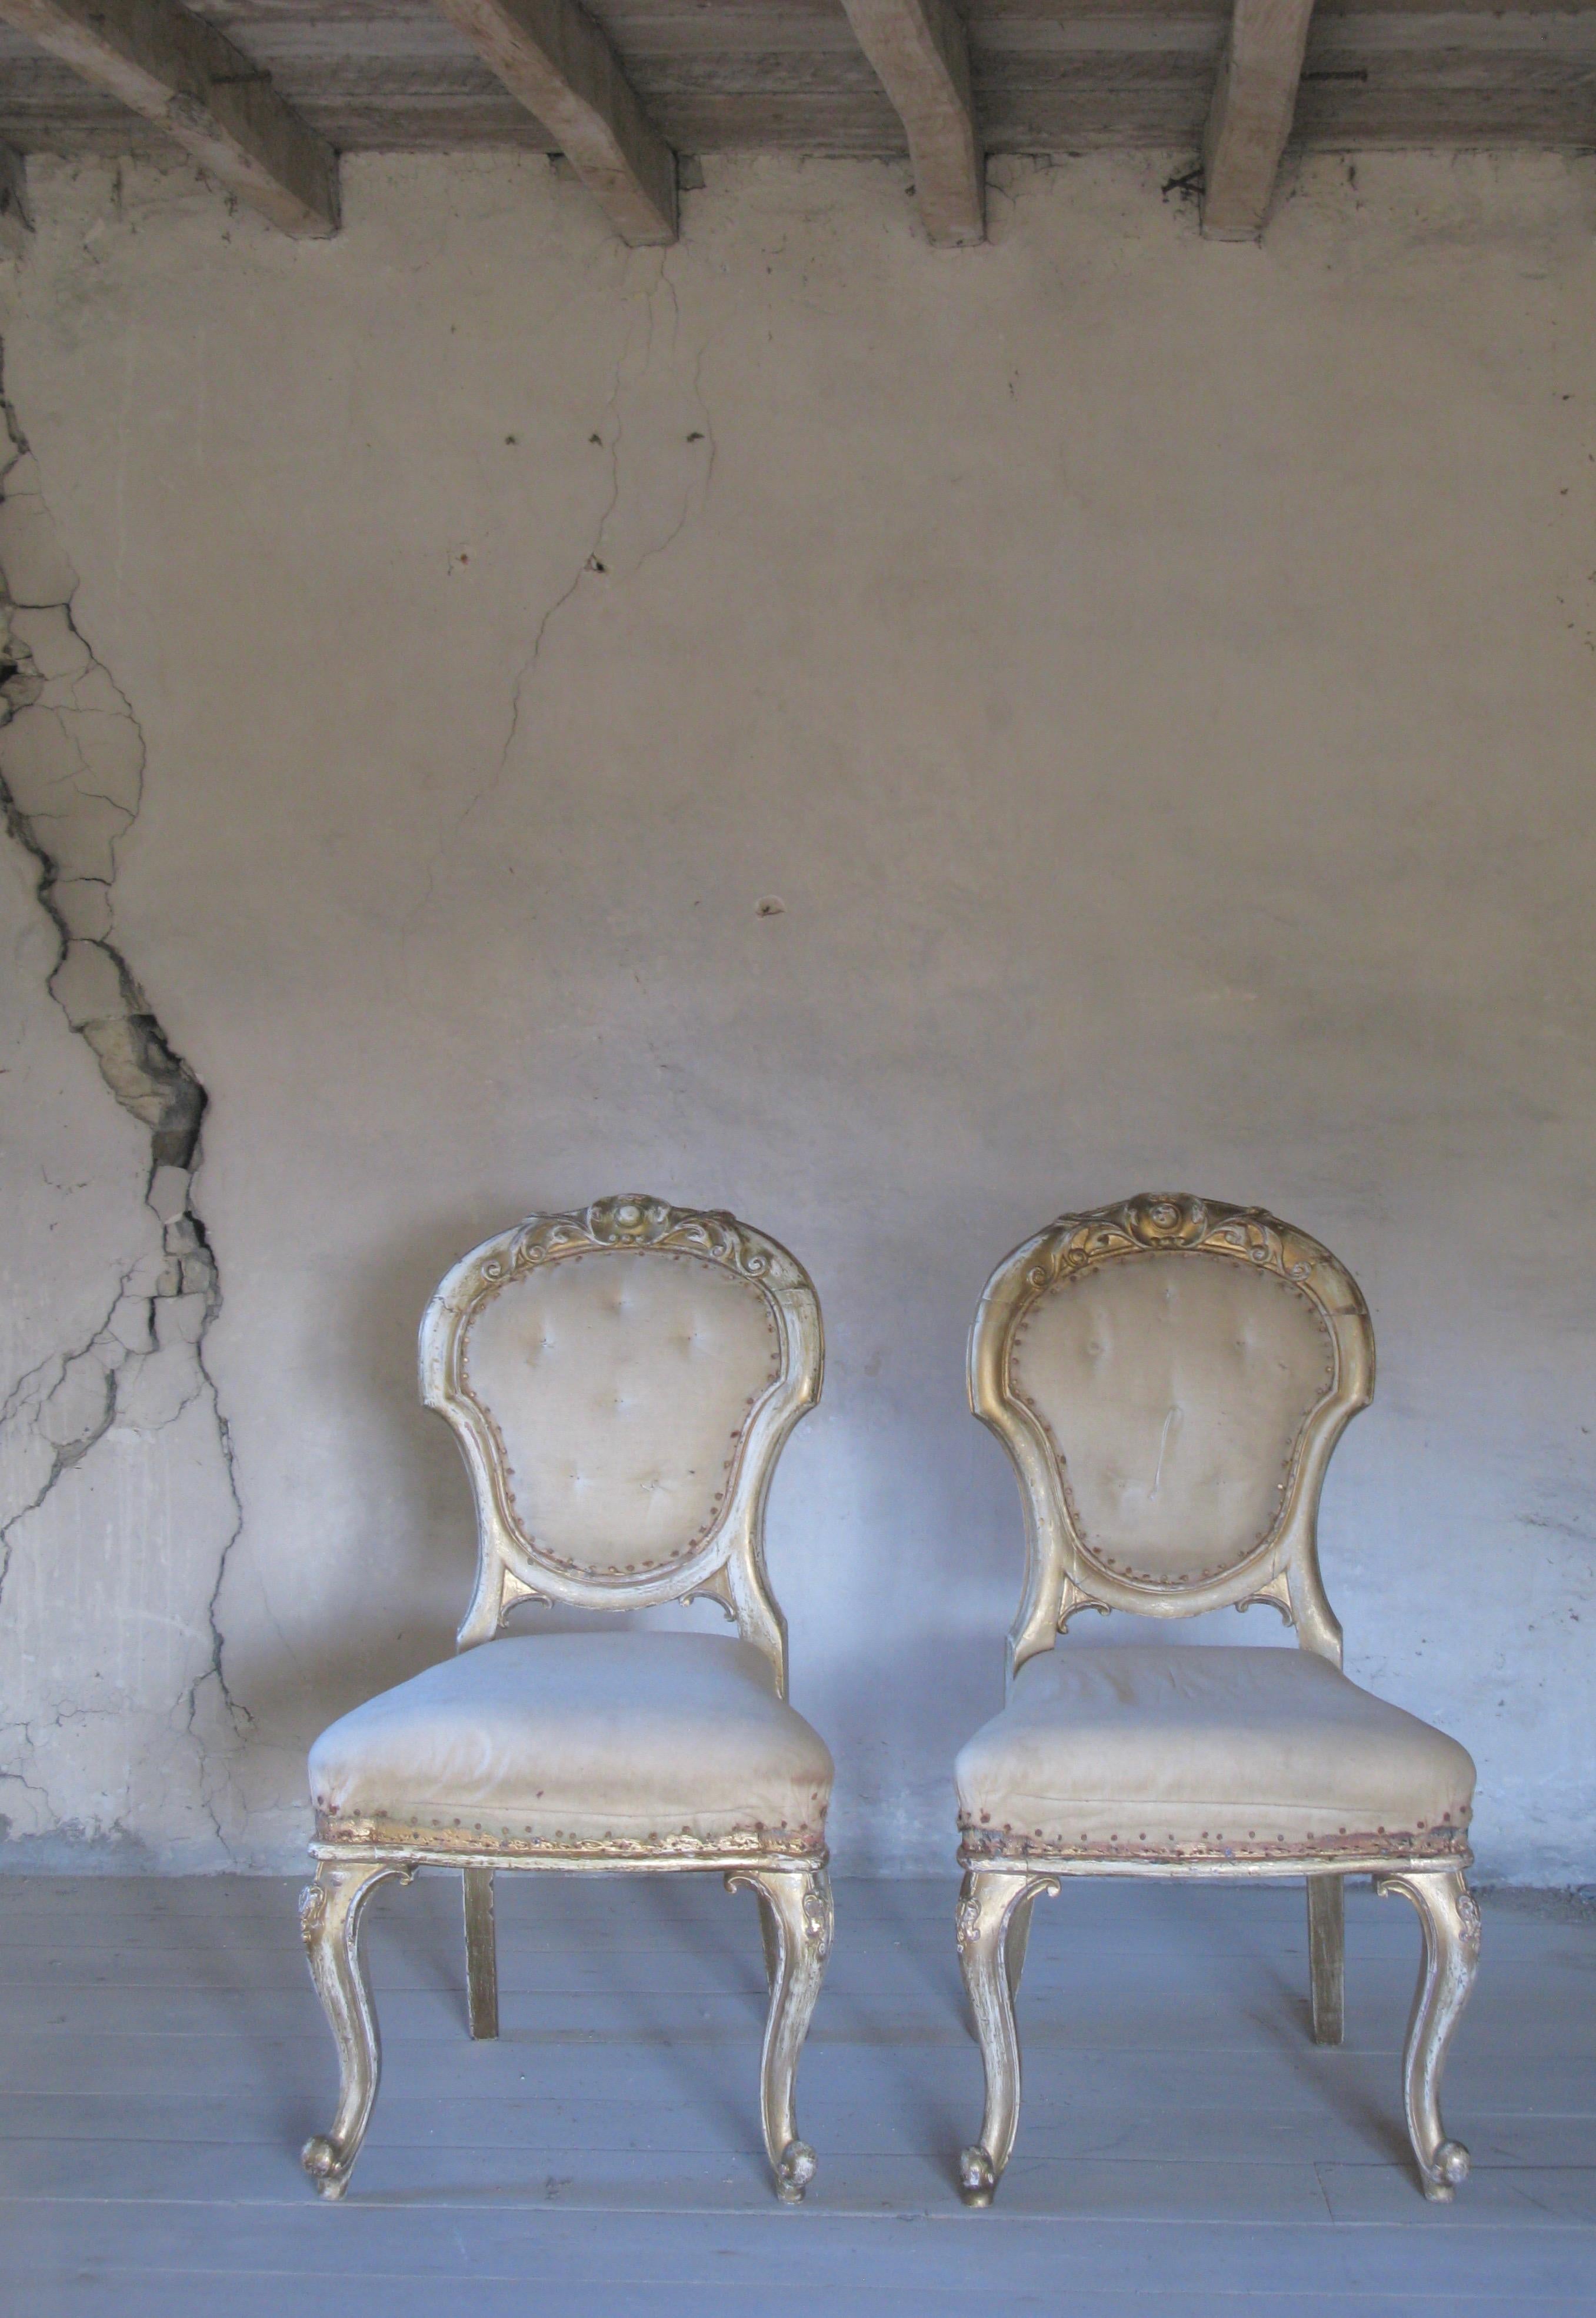 Gilt Pair of Dining Chairs, French Chairs, Gilded Chairs, Side Chairs, 19th Century For Sale